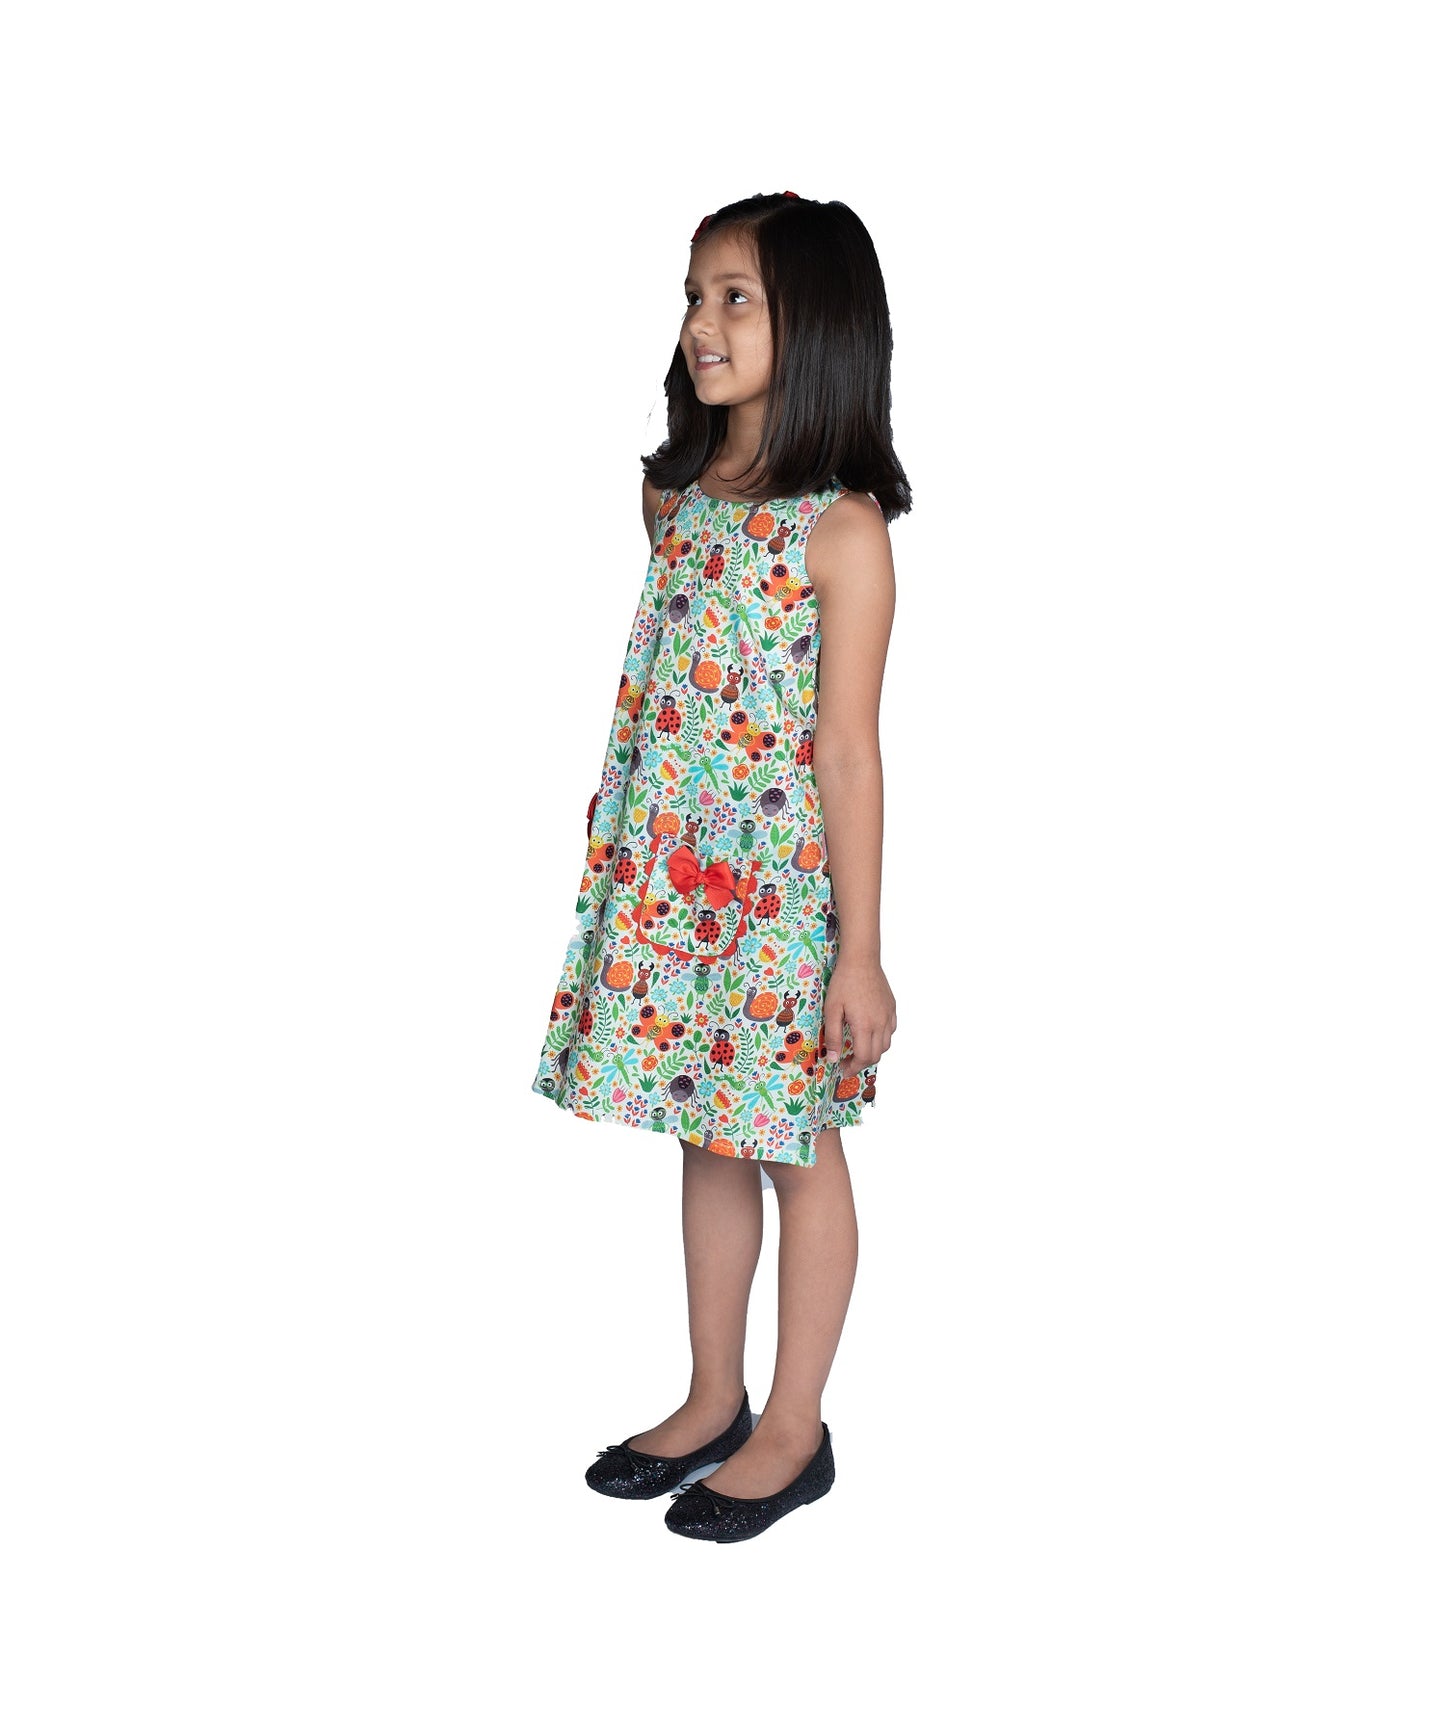 Ladybug Garden Print Shift Dress with Sleeveless sleeves and  Tow Pockets